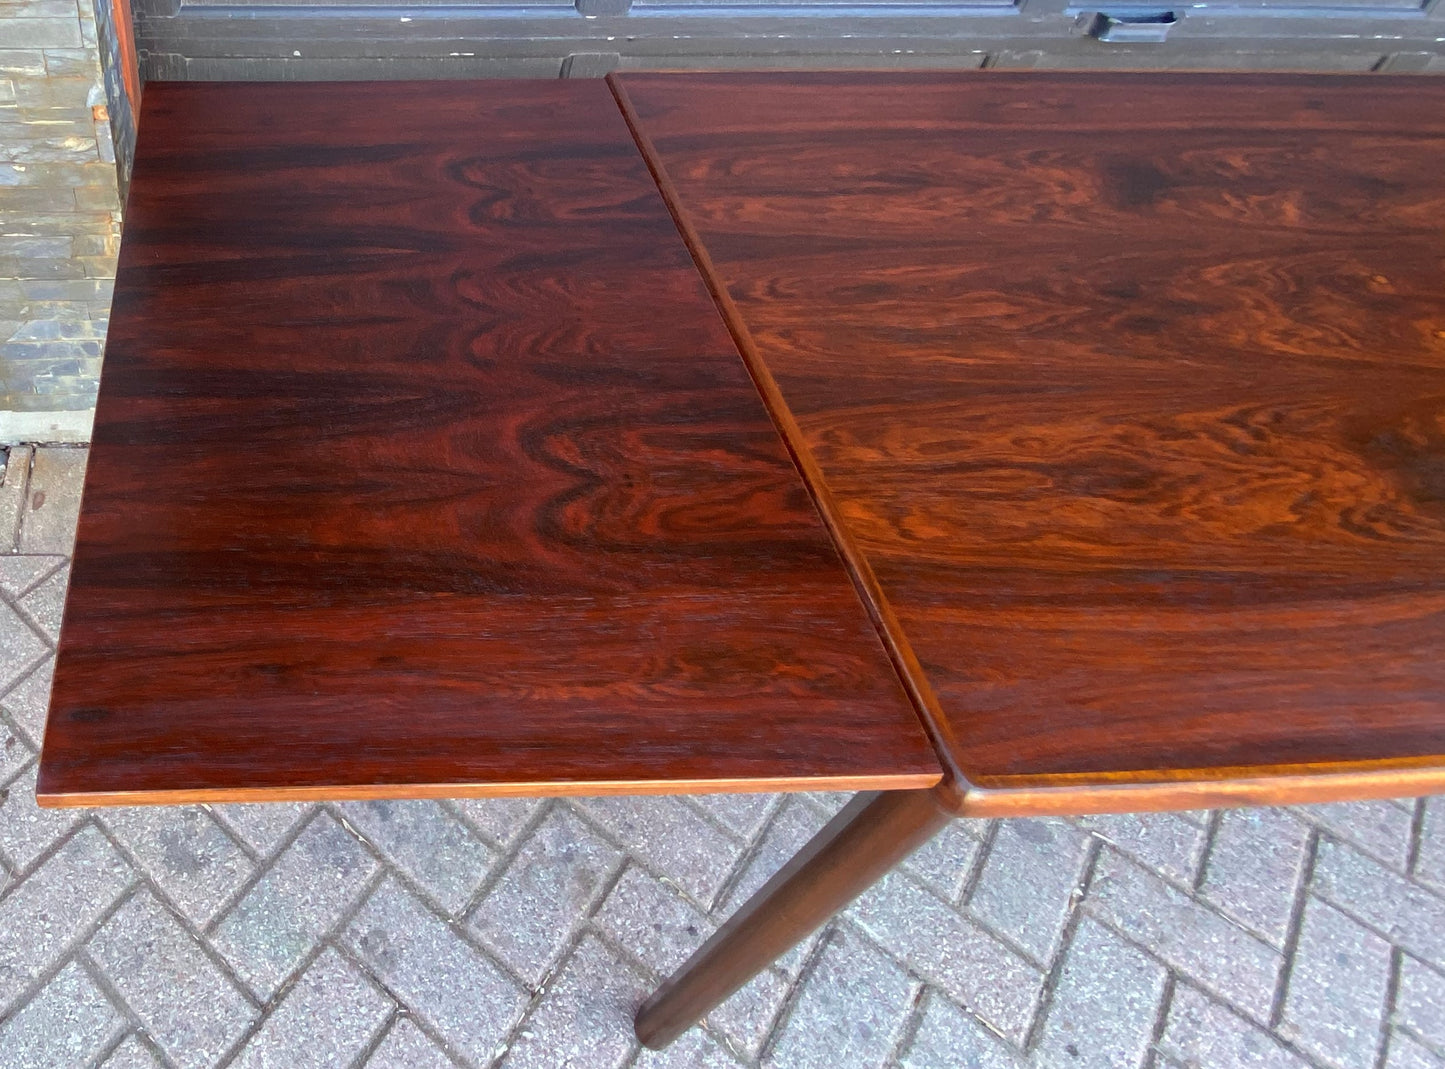 REFINISHED Danish MCM Rosewood Draw Leaf Table by H. Kjaernulf  51" - 93" PERFECT